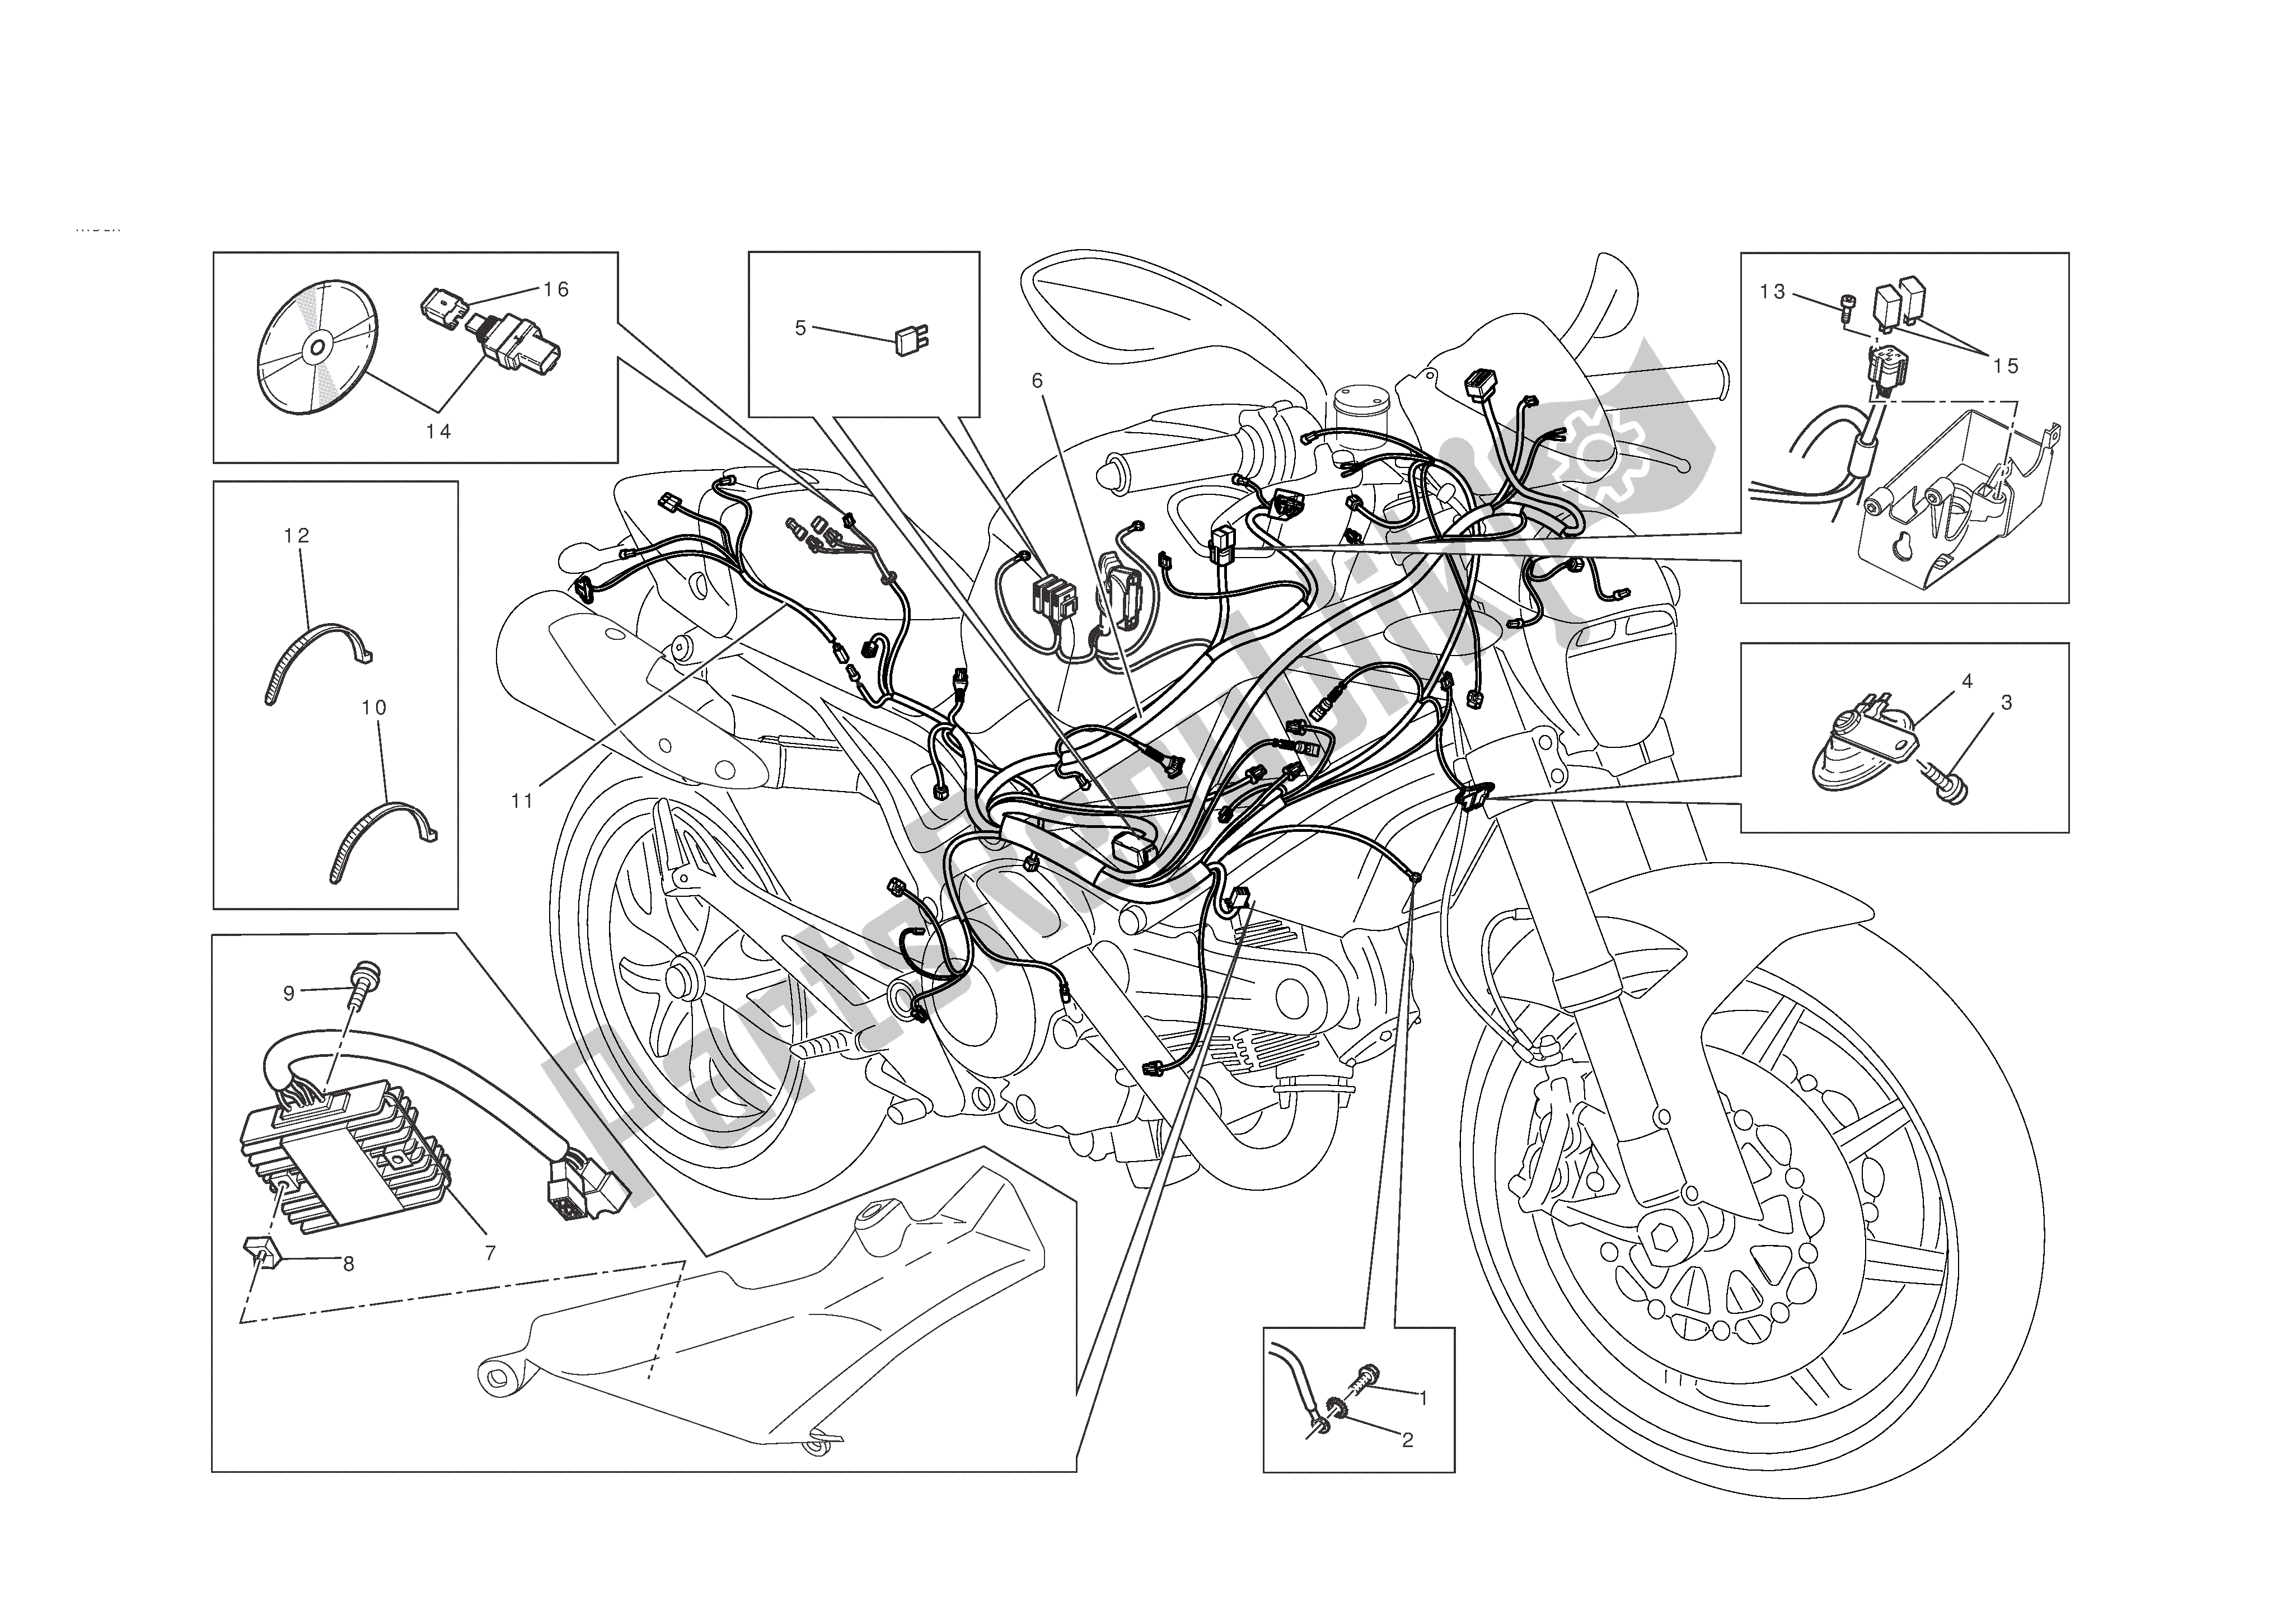 All parts for the Electrical System of the Ducati Monster ABS 796 2012